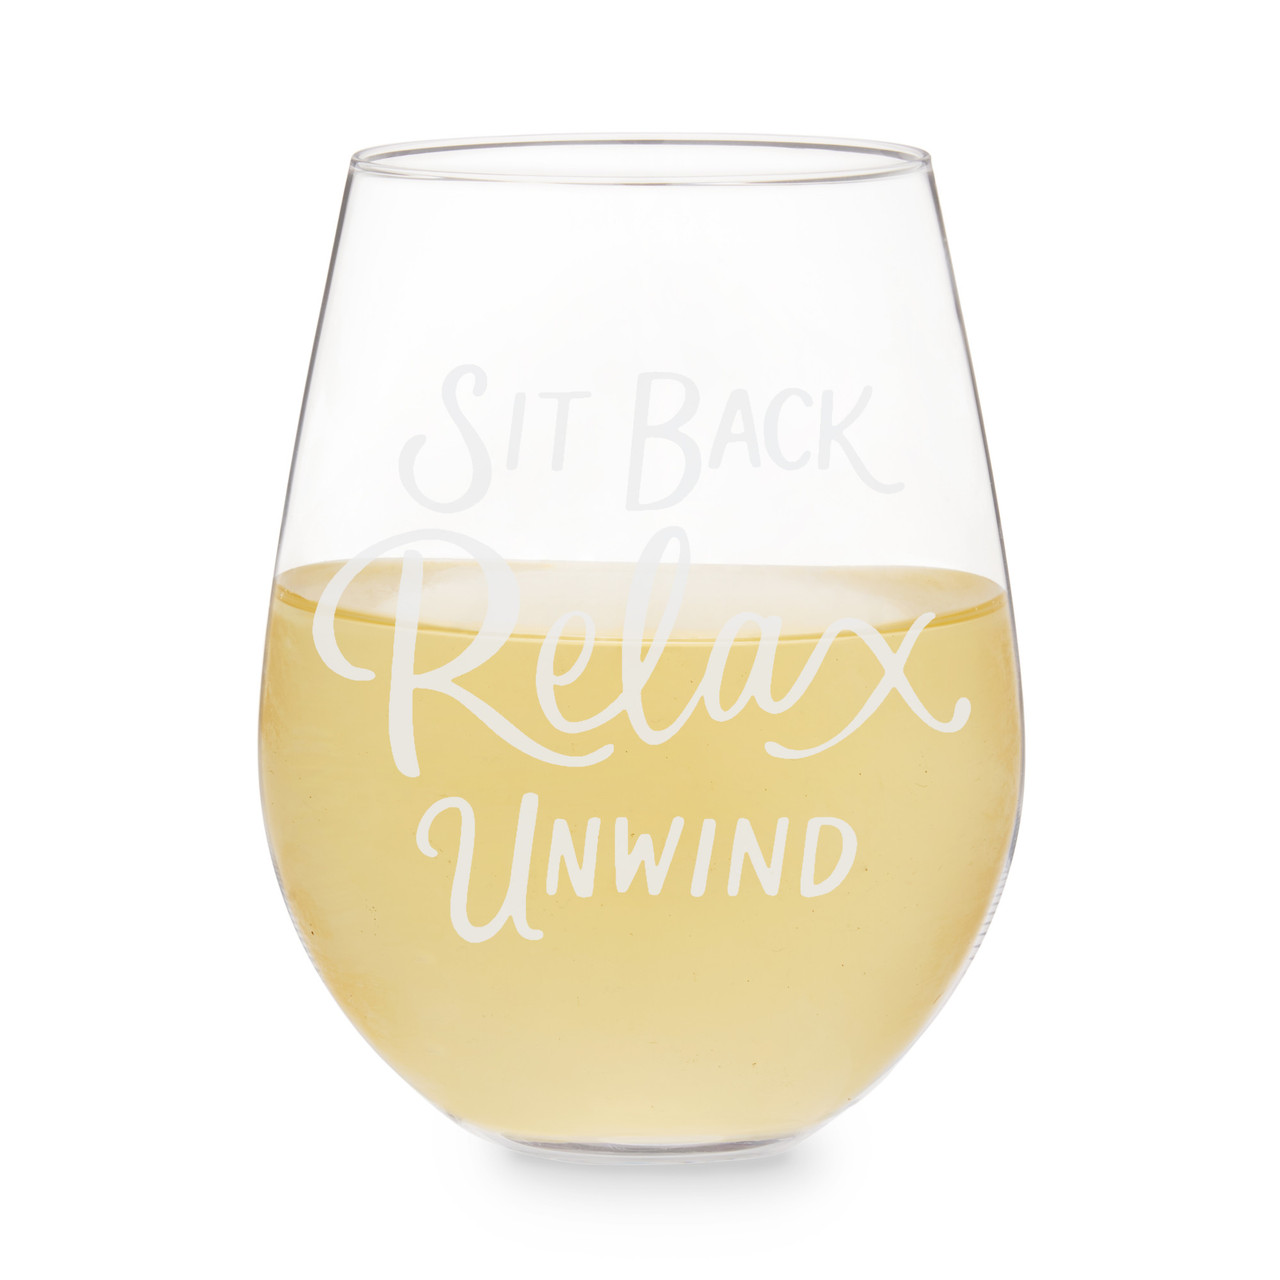 Sit Back and Relax Stemless Wine Glass by Twine®